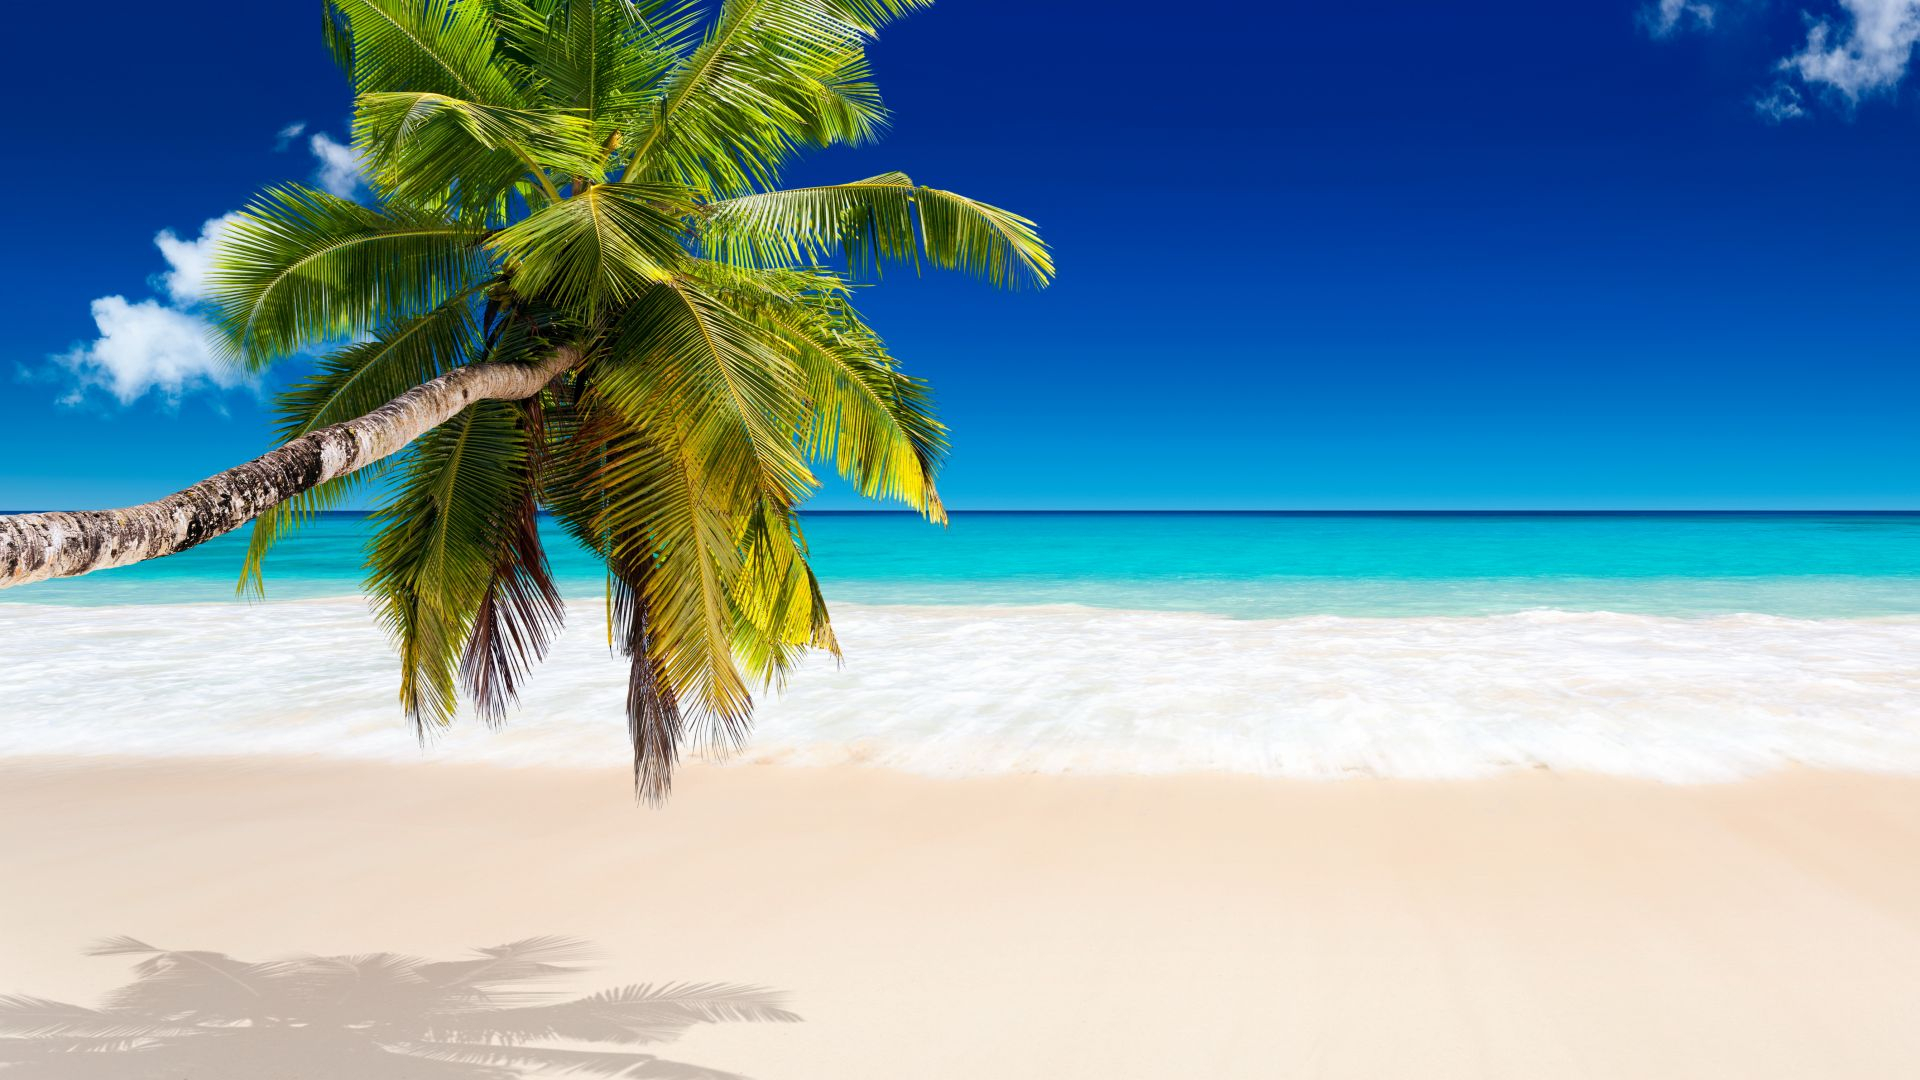 1920x1080 Green Palm Tree on White Sand Beach During Daytime Full HD KDE Store